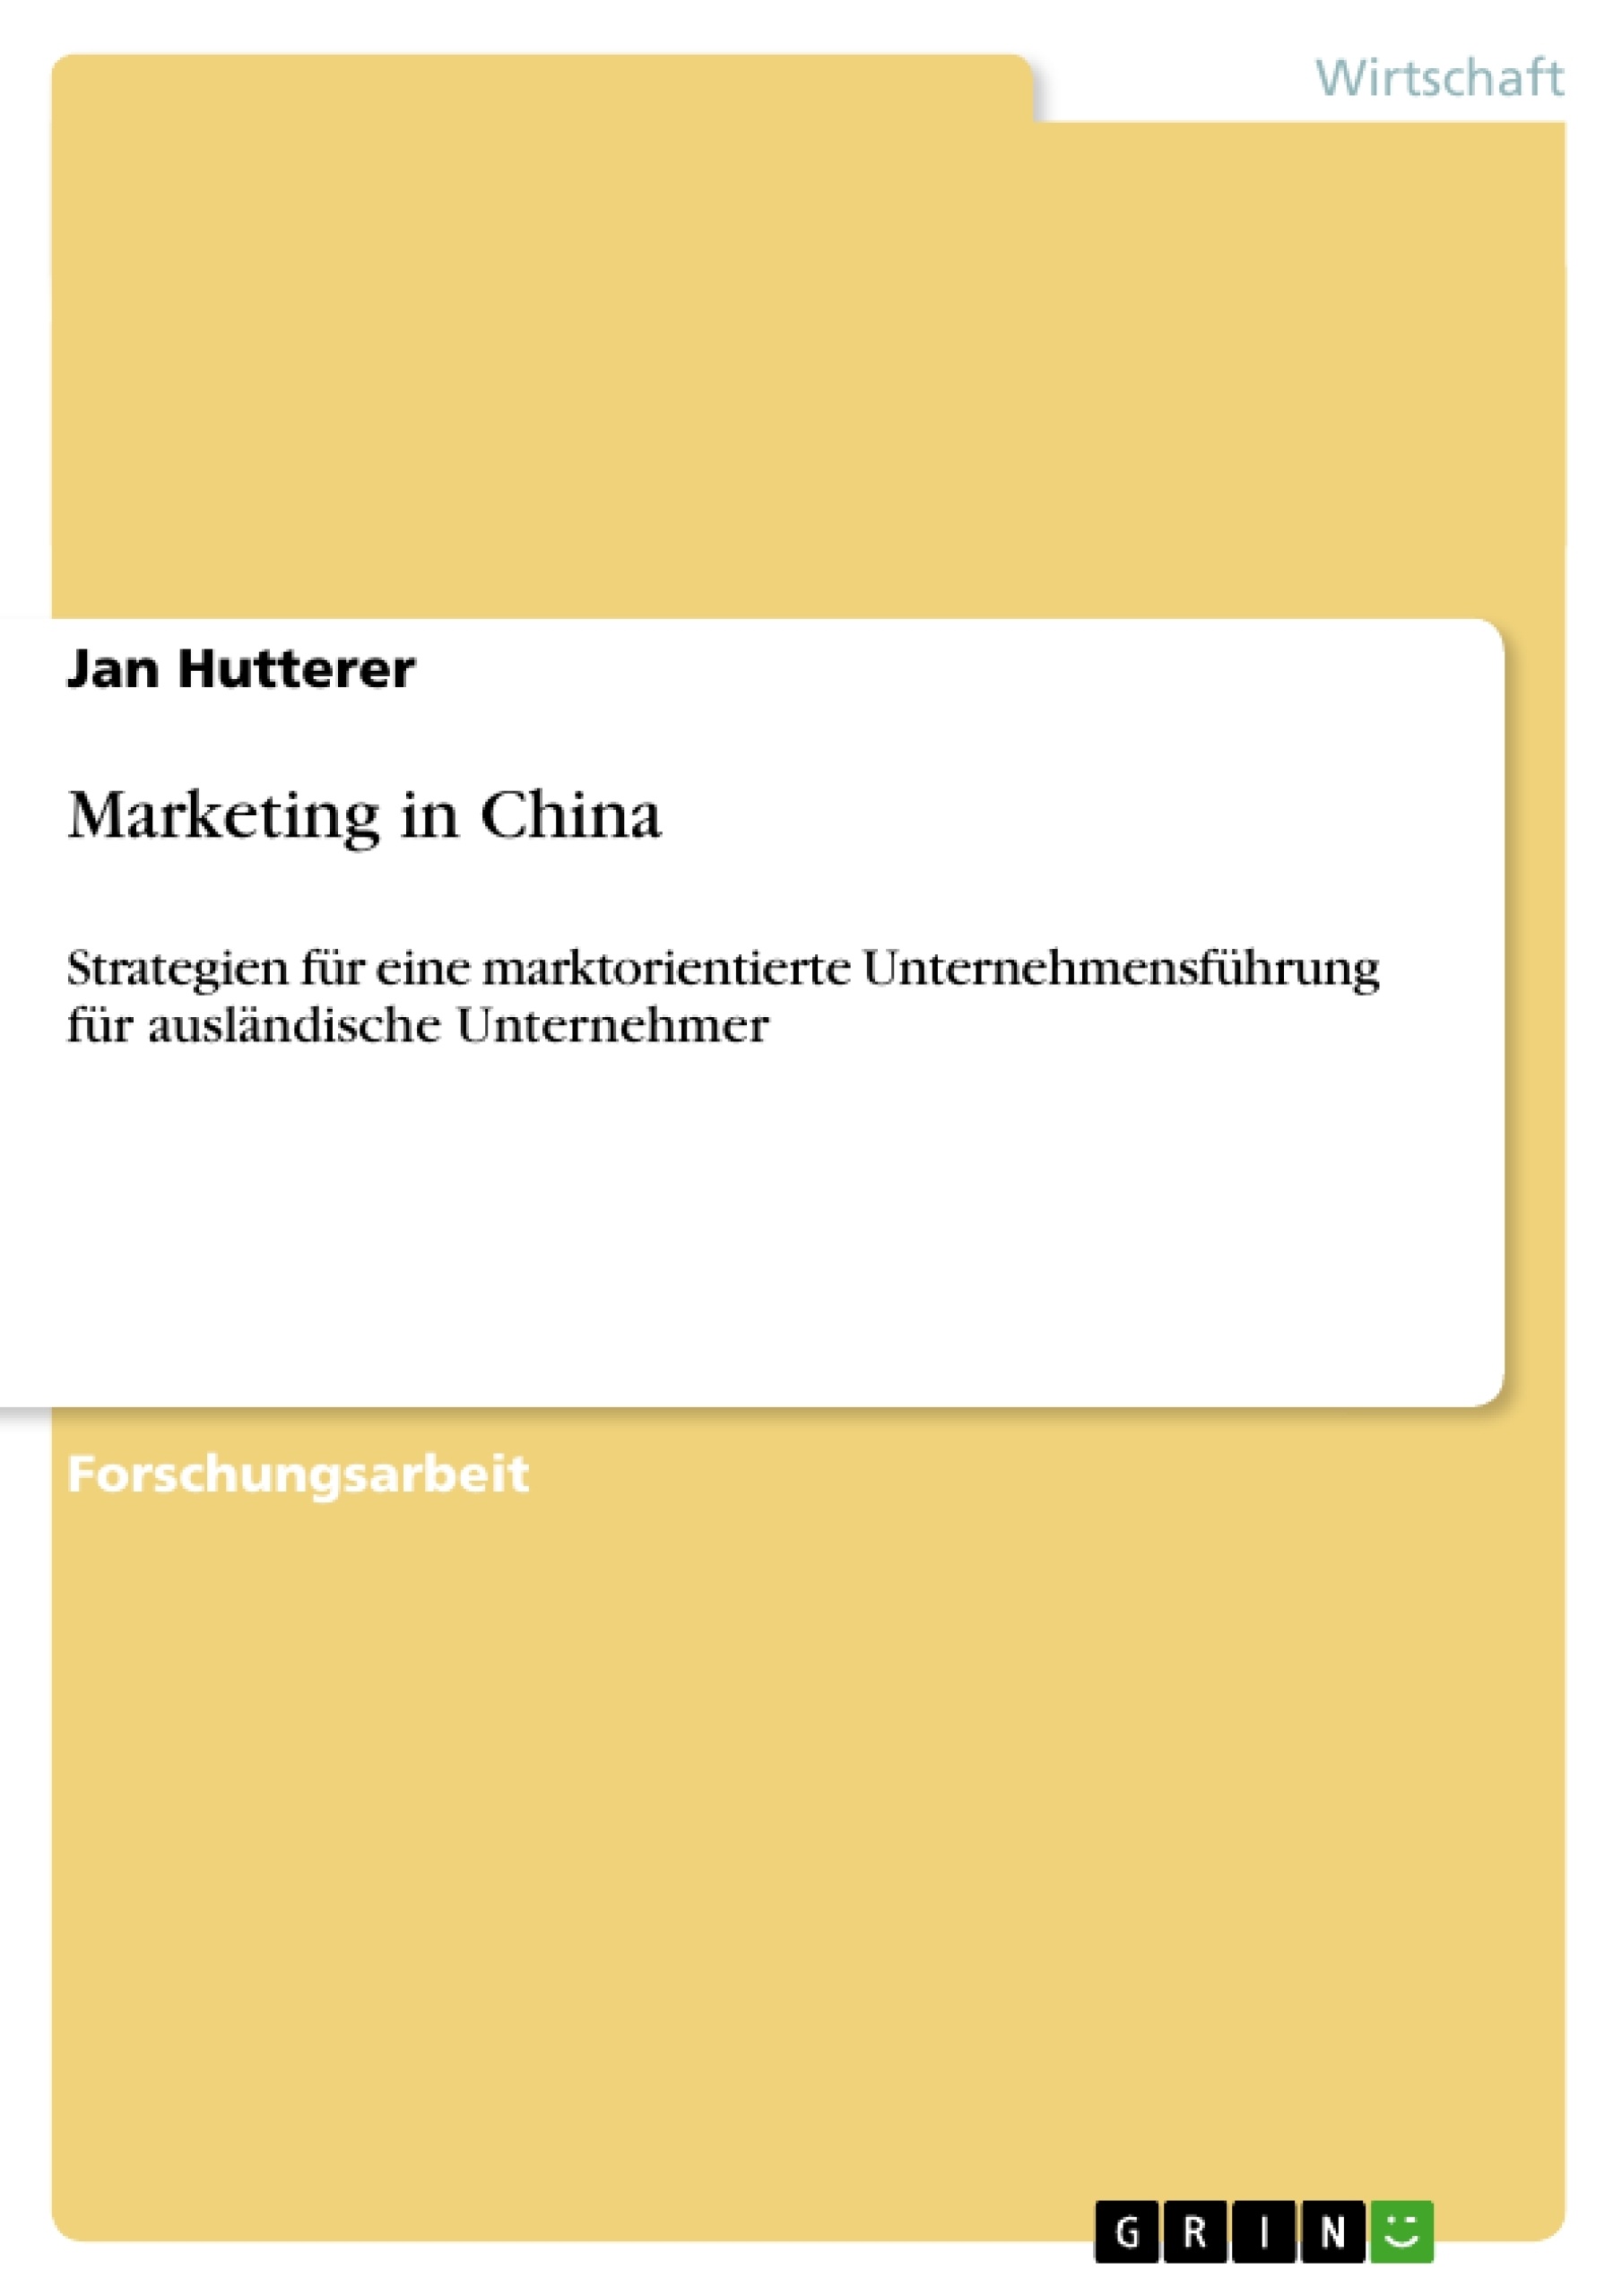 Titre: Marketing in China